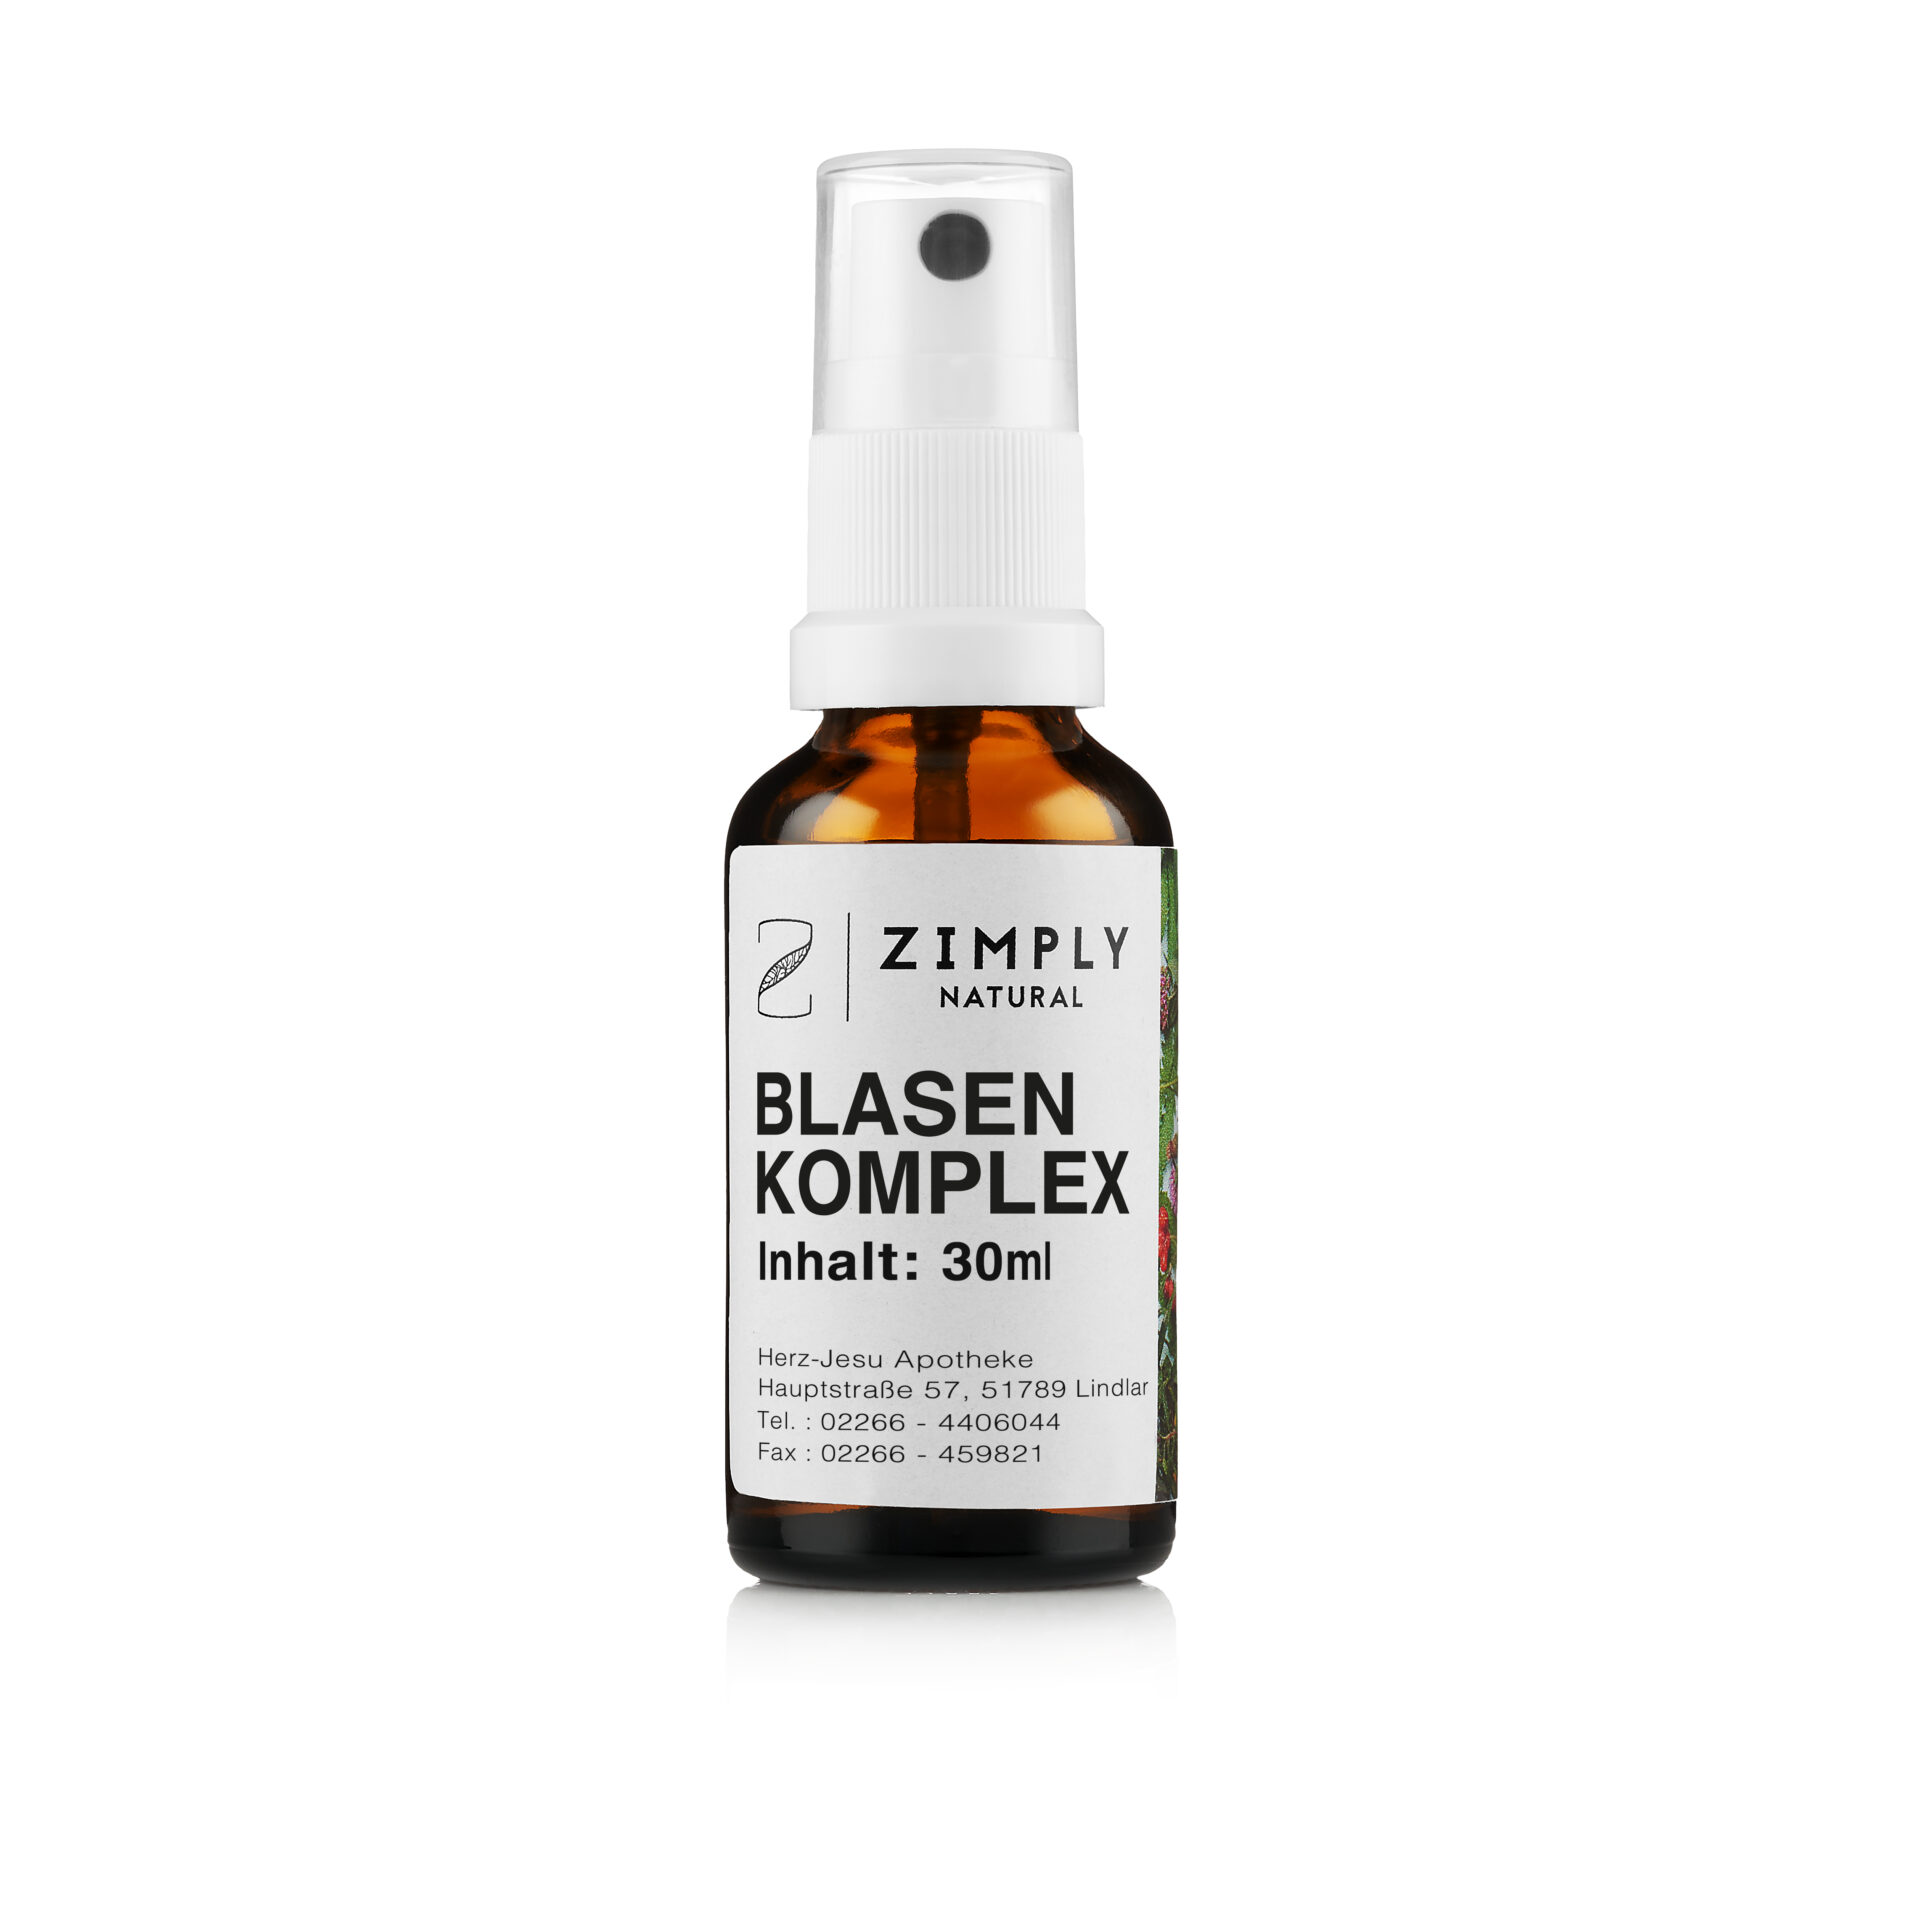 Zimply Natural cystitis complex mixture